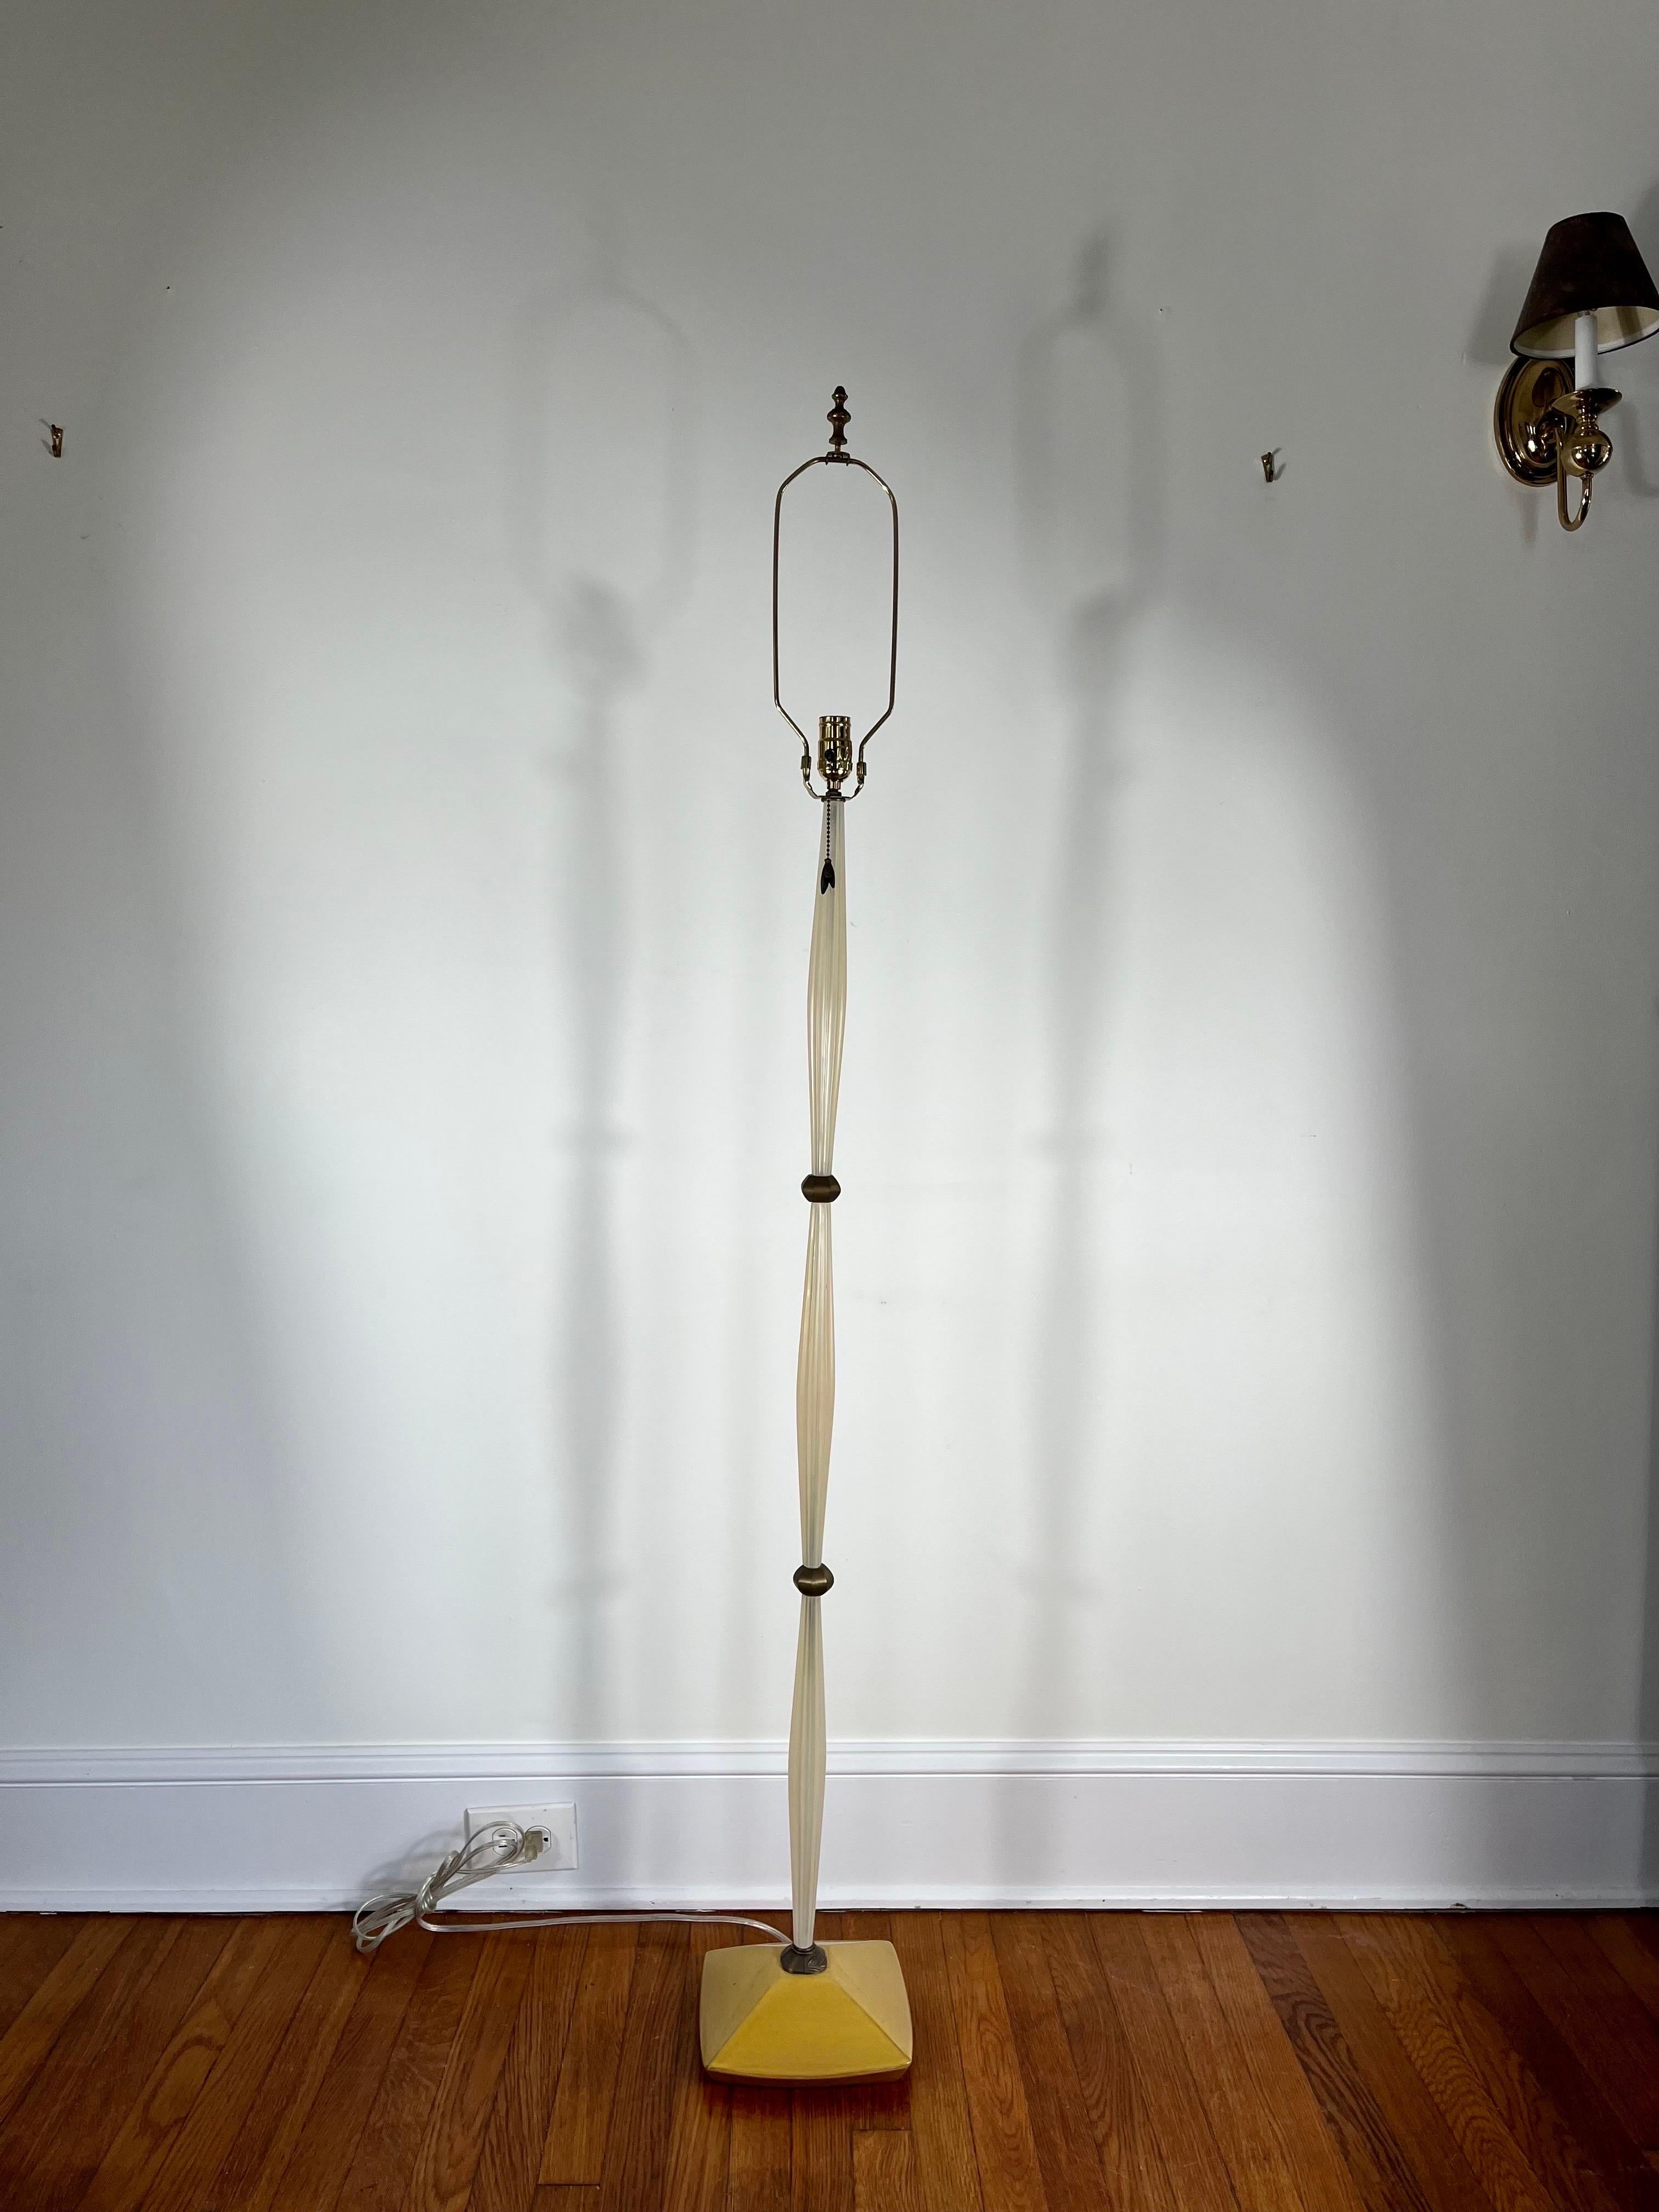 ALTAMIRA by MICHAEL LAMAR floor lamp. Artisan Hand Crafted Acrylic floor amp. Glazed Ceramic Base. MICHAEL LAMAR has been designing and creating innovative, colorful and whimsical lamps for more than 25 years and has been teaching at the Rhode